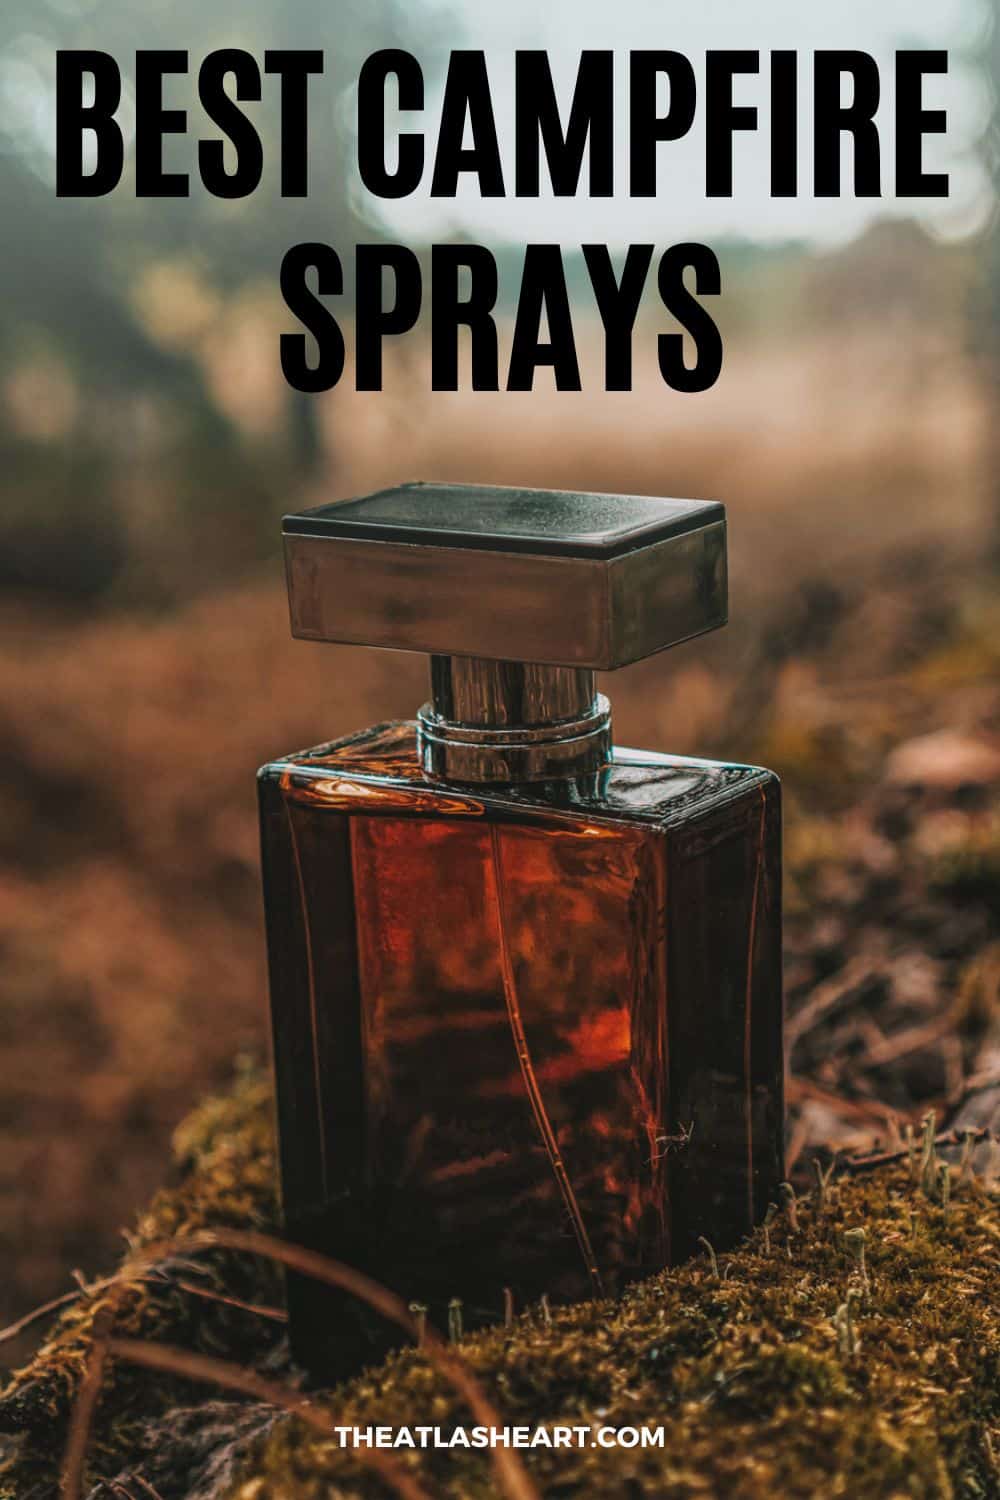 11 Best Campfire Sprays and Colognes to Remind You of Your Last Camping Trip